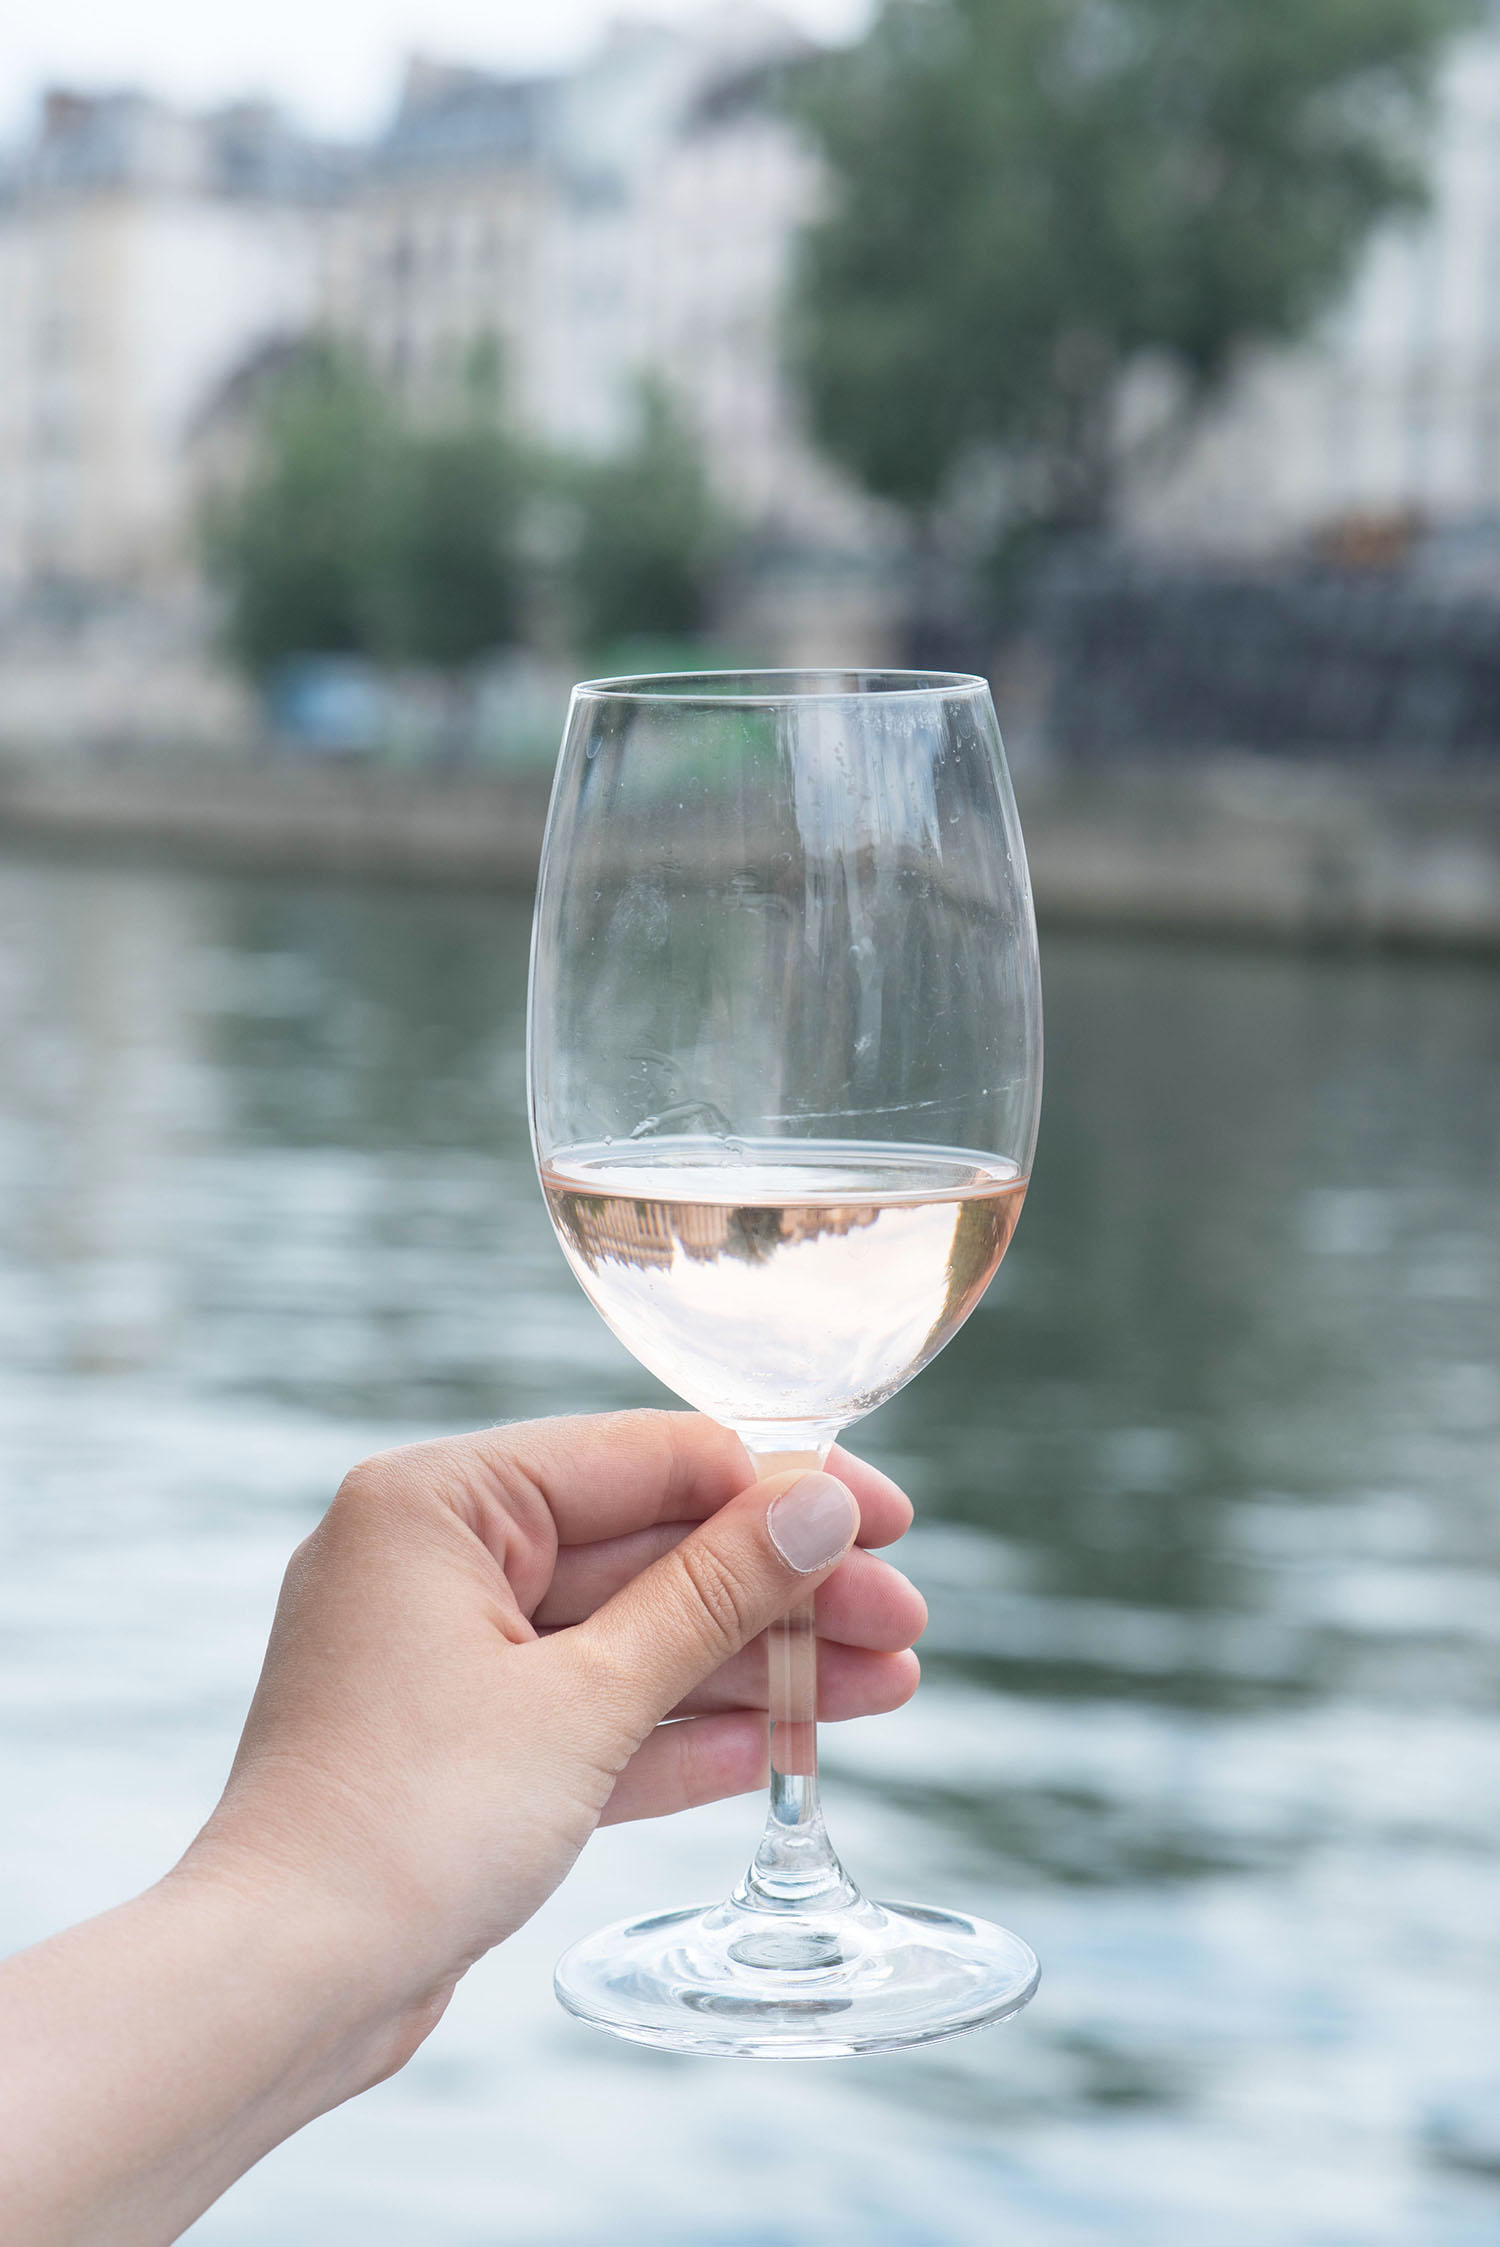 Paris' left bank reflected in a glass of rose wine held by fashion blogger Cee Fardoe of Coco & Vera